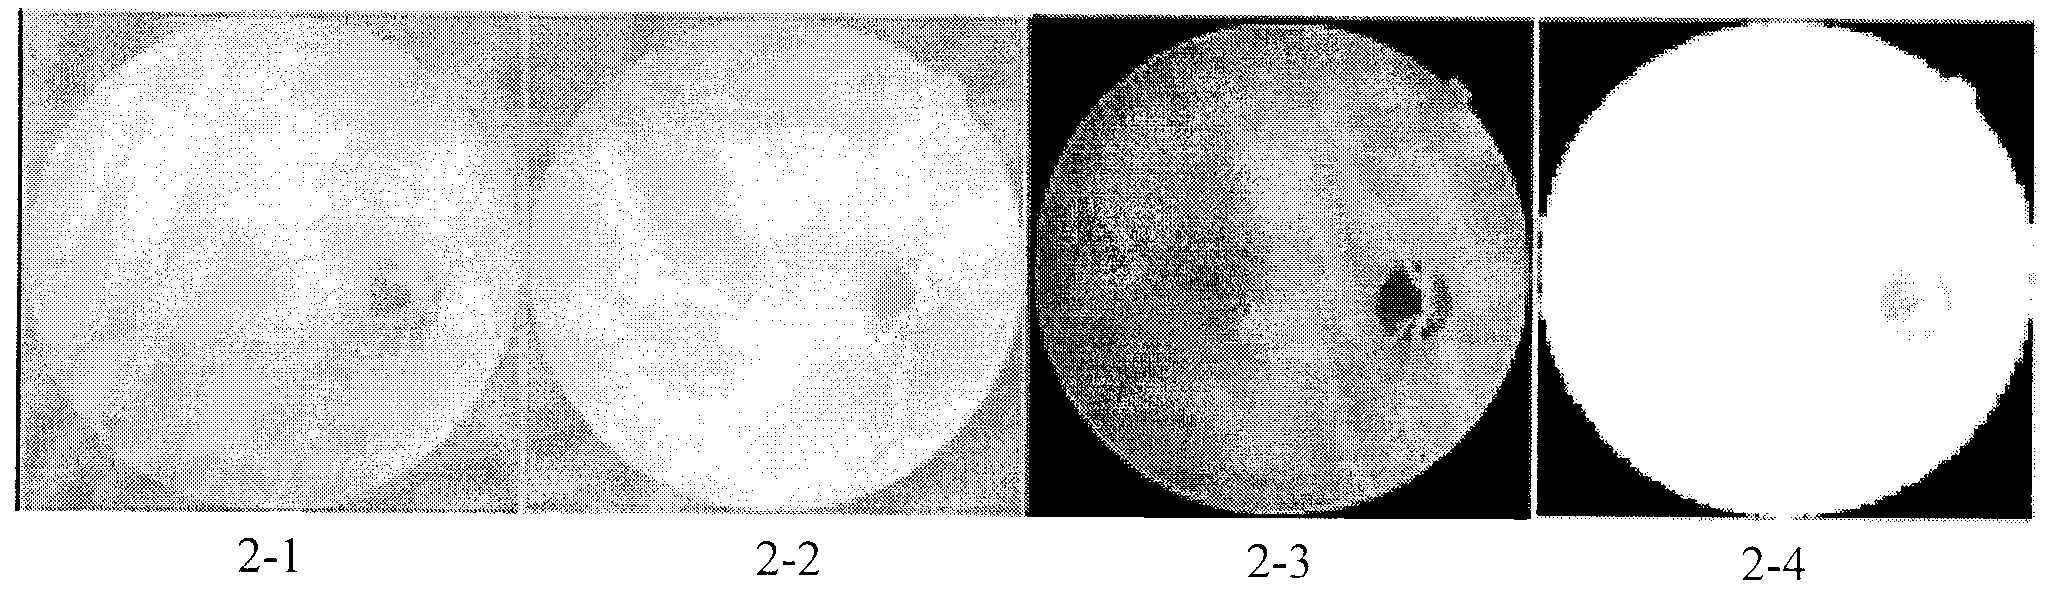 Method for positioning optic disk for eye fundus image on basis of PC (Phase Congruency)